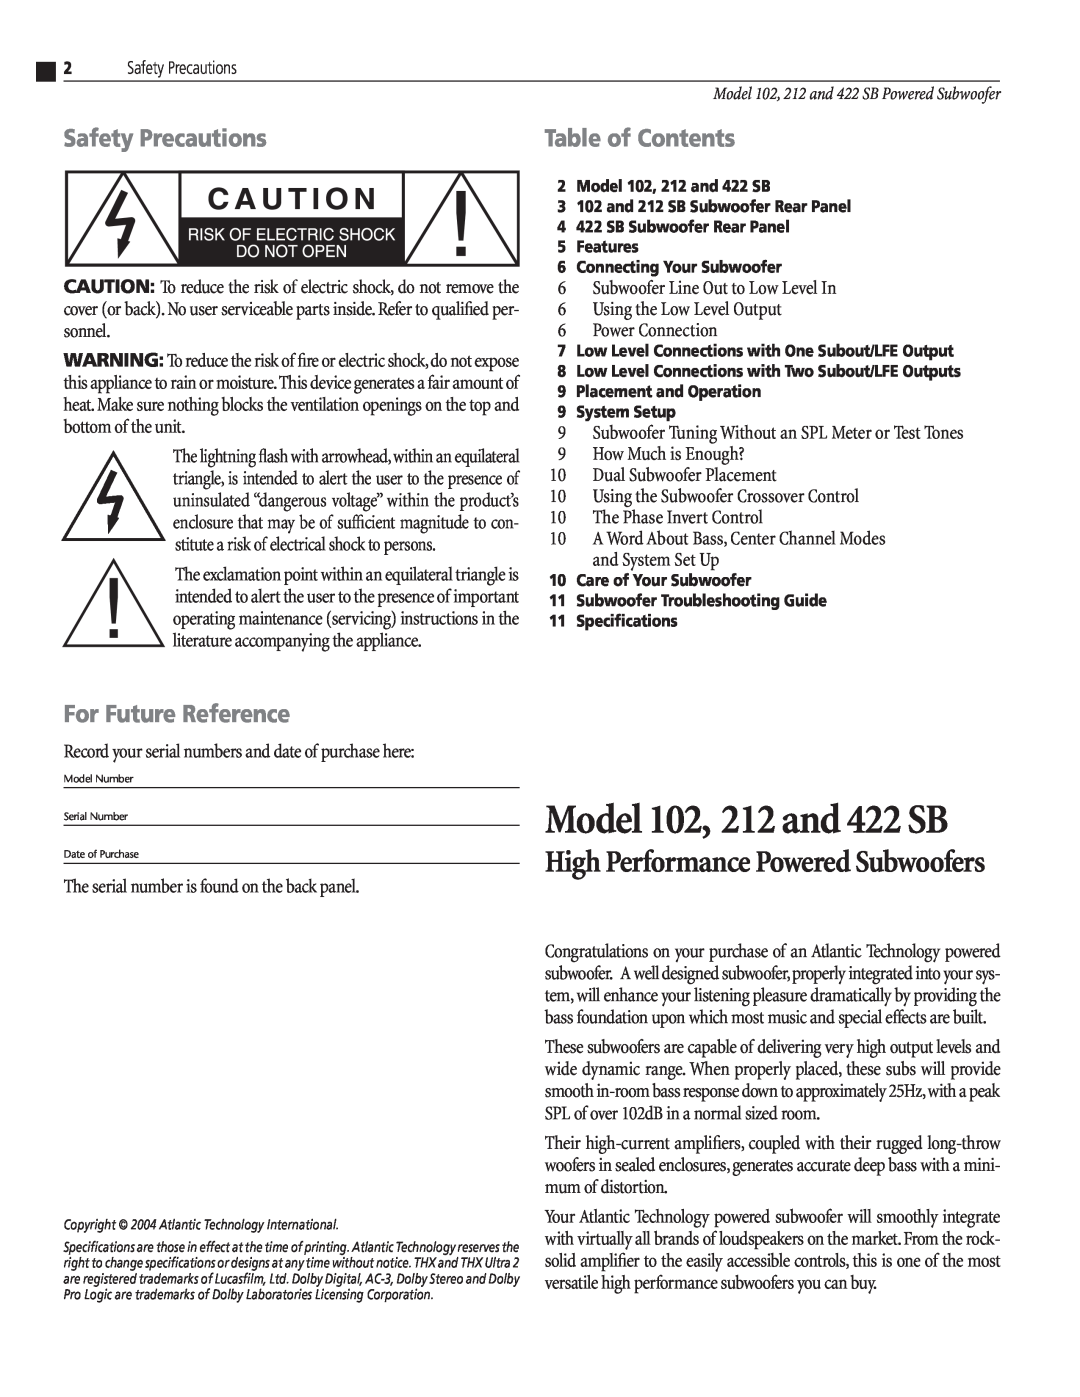 Atlantic Technology 212 SB, 102 SB Safety Precautions, For Future Reference, Model 102, 212 and 422 SB, Table of Contents 